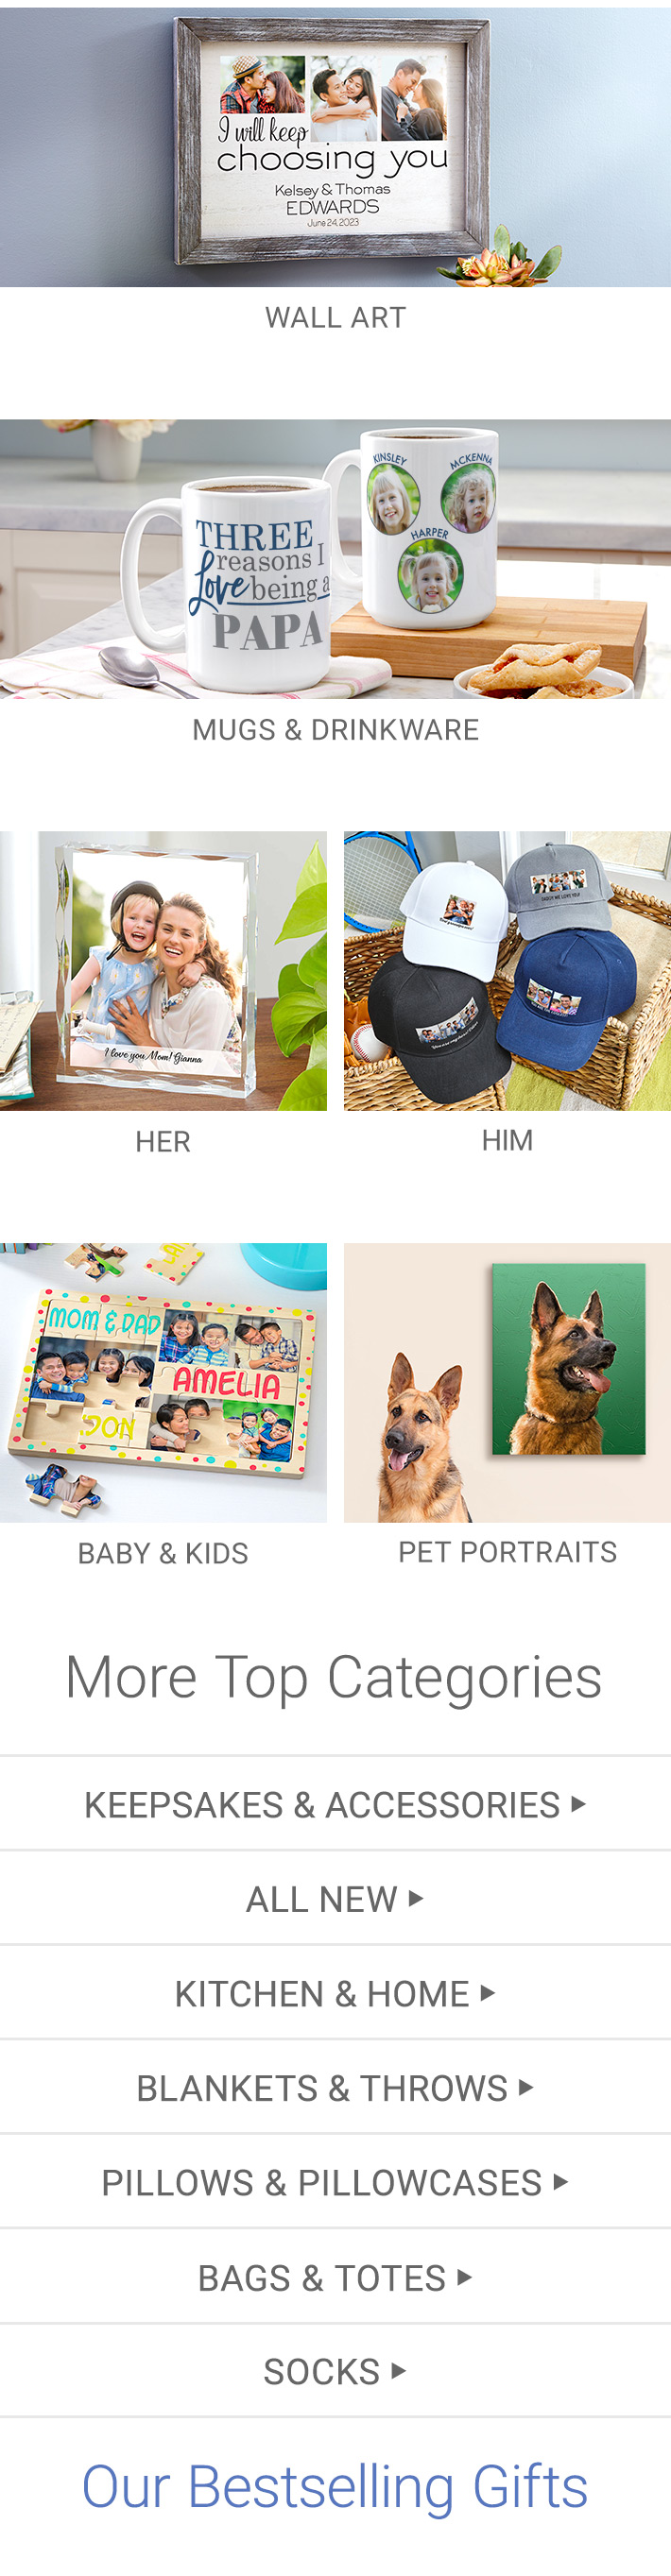 Photo Gifts, Custom Photo Gifts, Best Gift Ideas Online